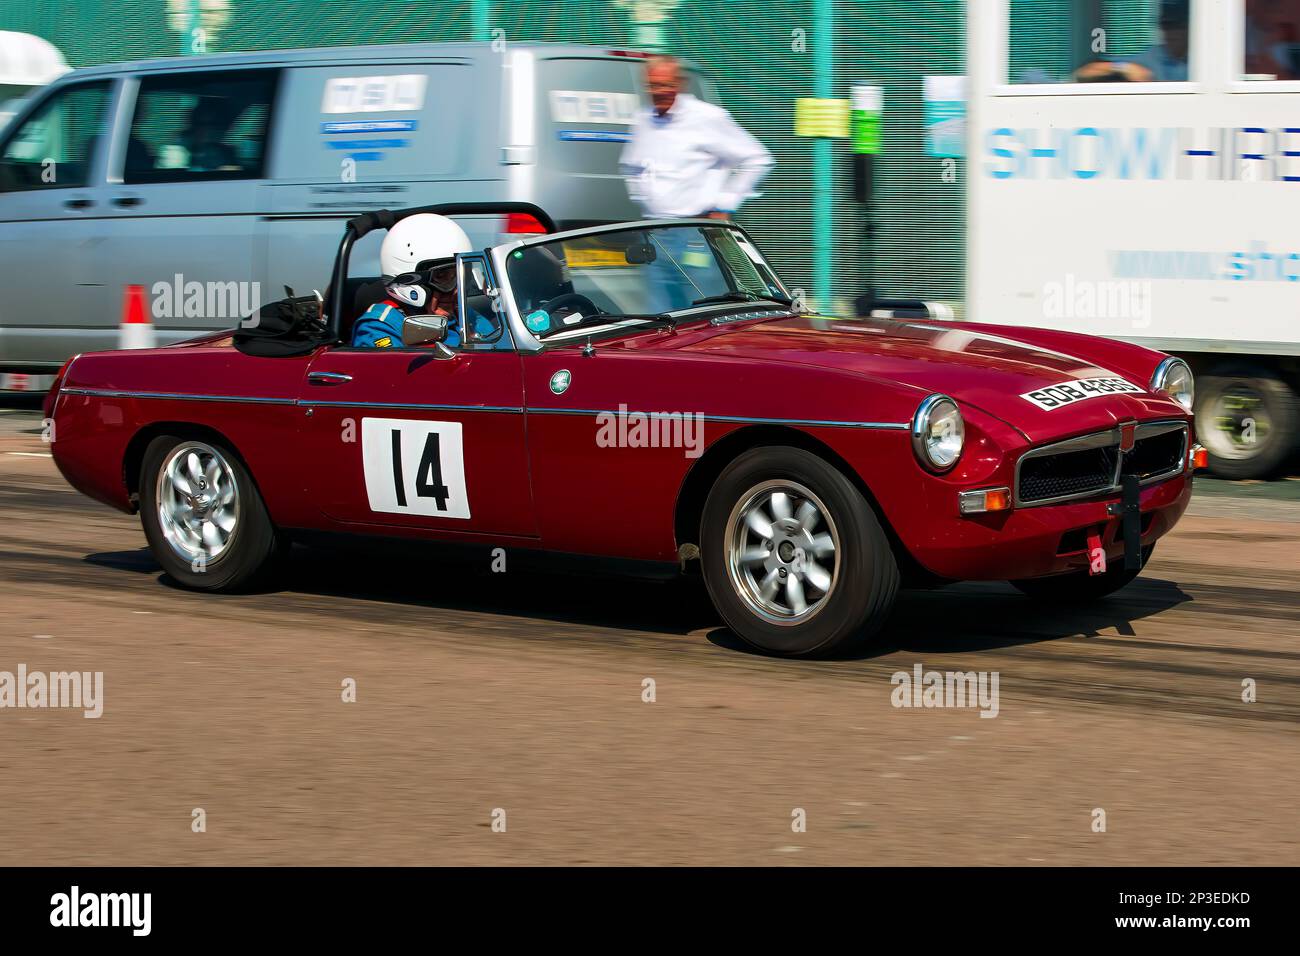 John Hunt driving a MGB Roadster at The Brighton National Speed Trials 2017. This is the oldest motor racing event in the UK and is held in the south east coastal town of Brighton. Madeira drive is a road which runs along the seafront and is normal full of people explorer the beach, pier and local attractions. Today it is turned in to a 1/4 time trial course. 2nd September 2017. Stock Photo